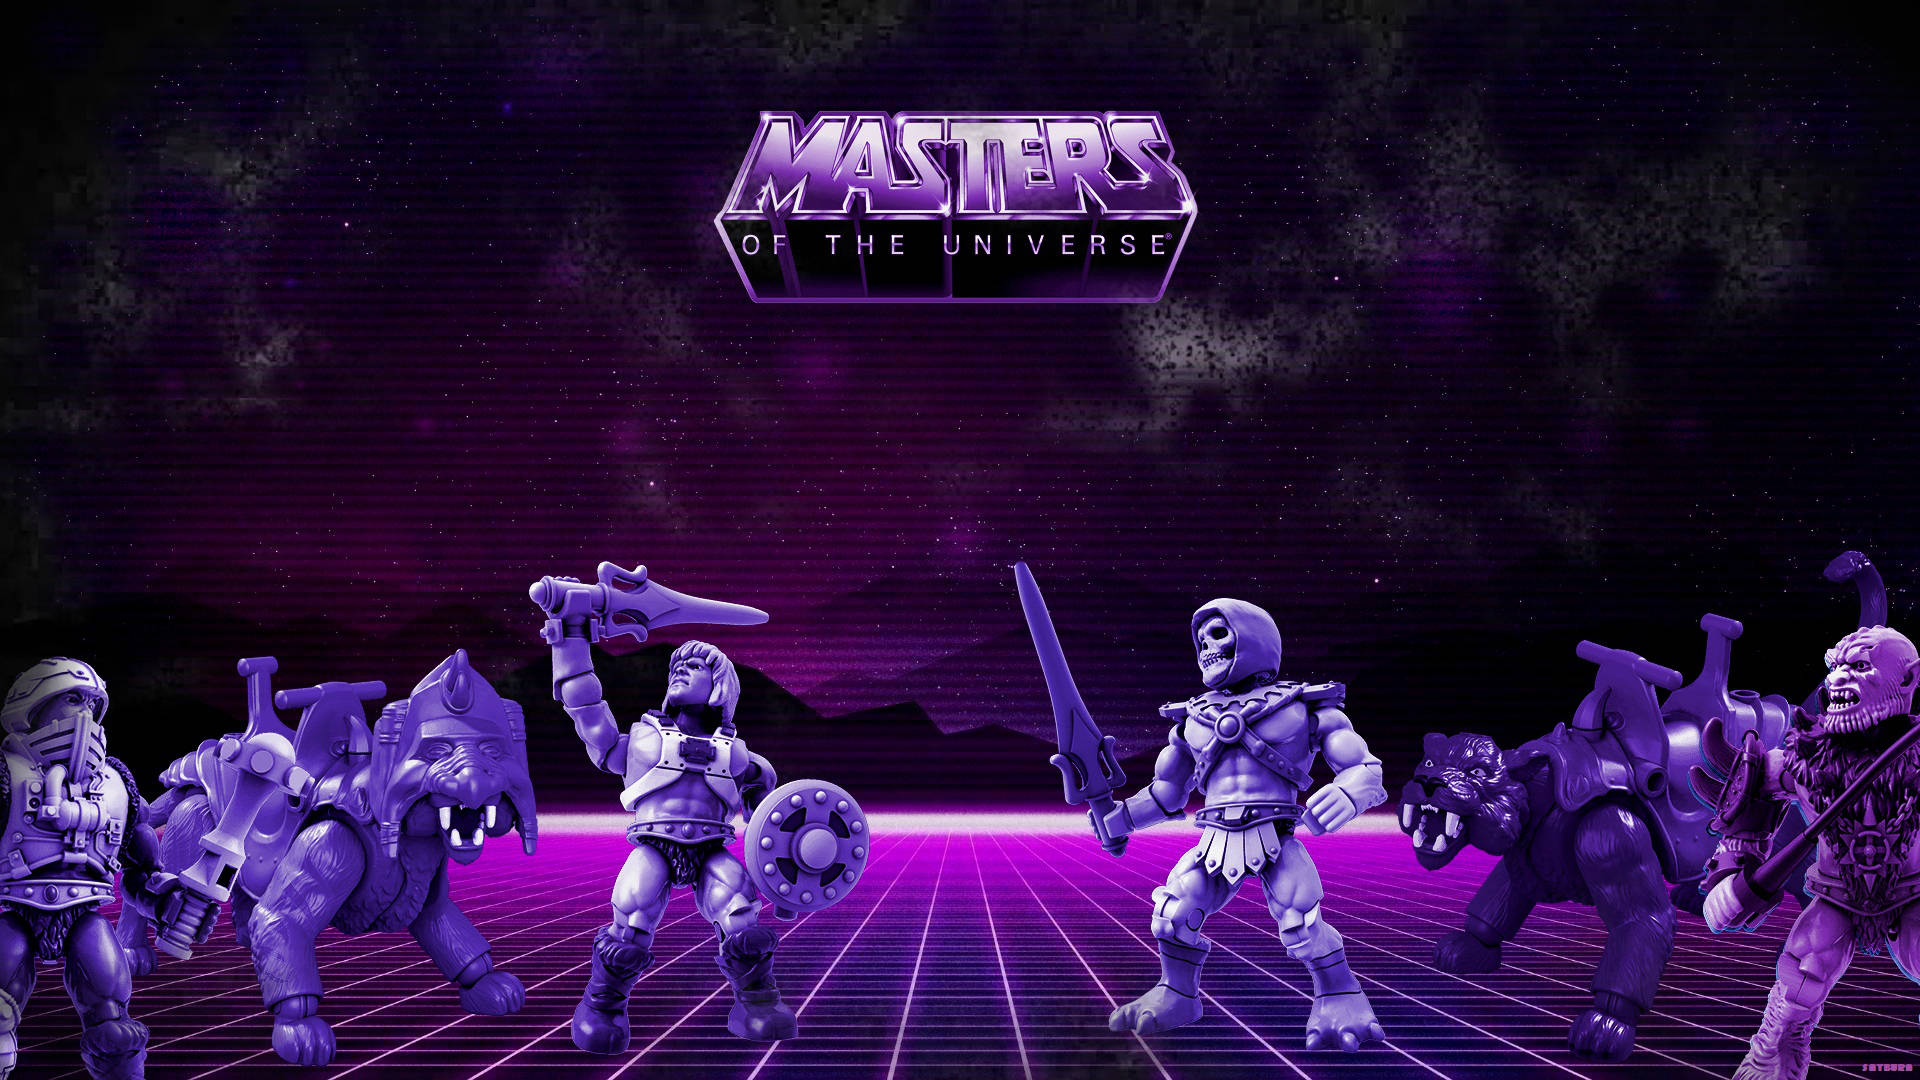 Retro Aesthetic He-Man And The Masters Of The Universe Wallpaper